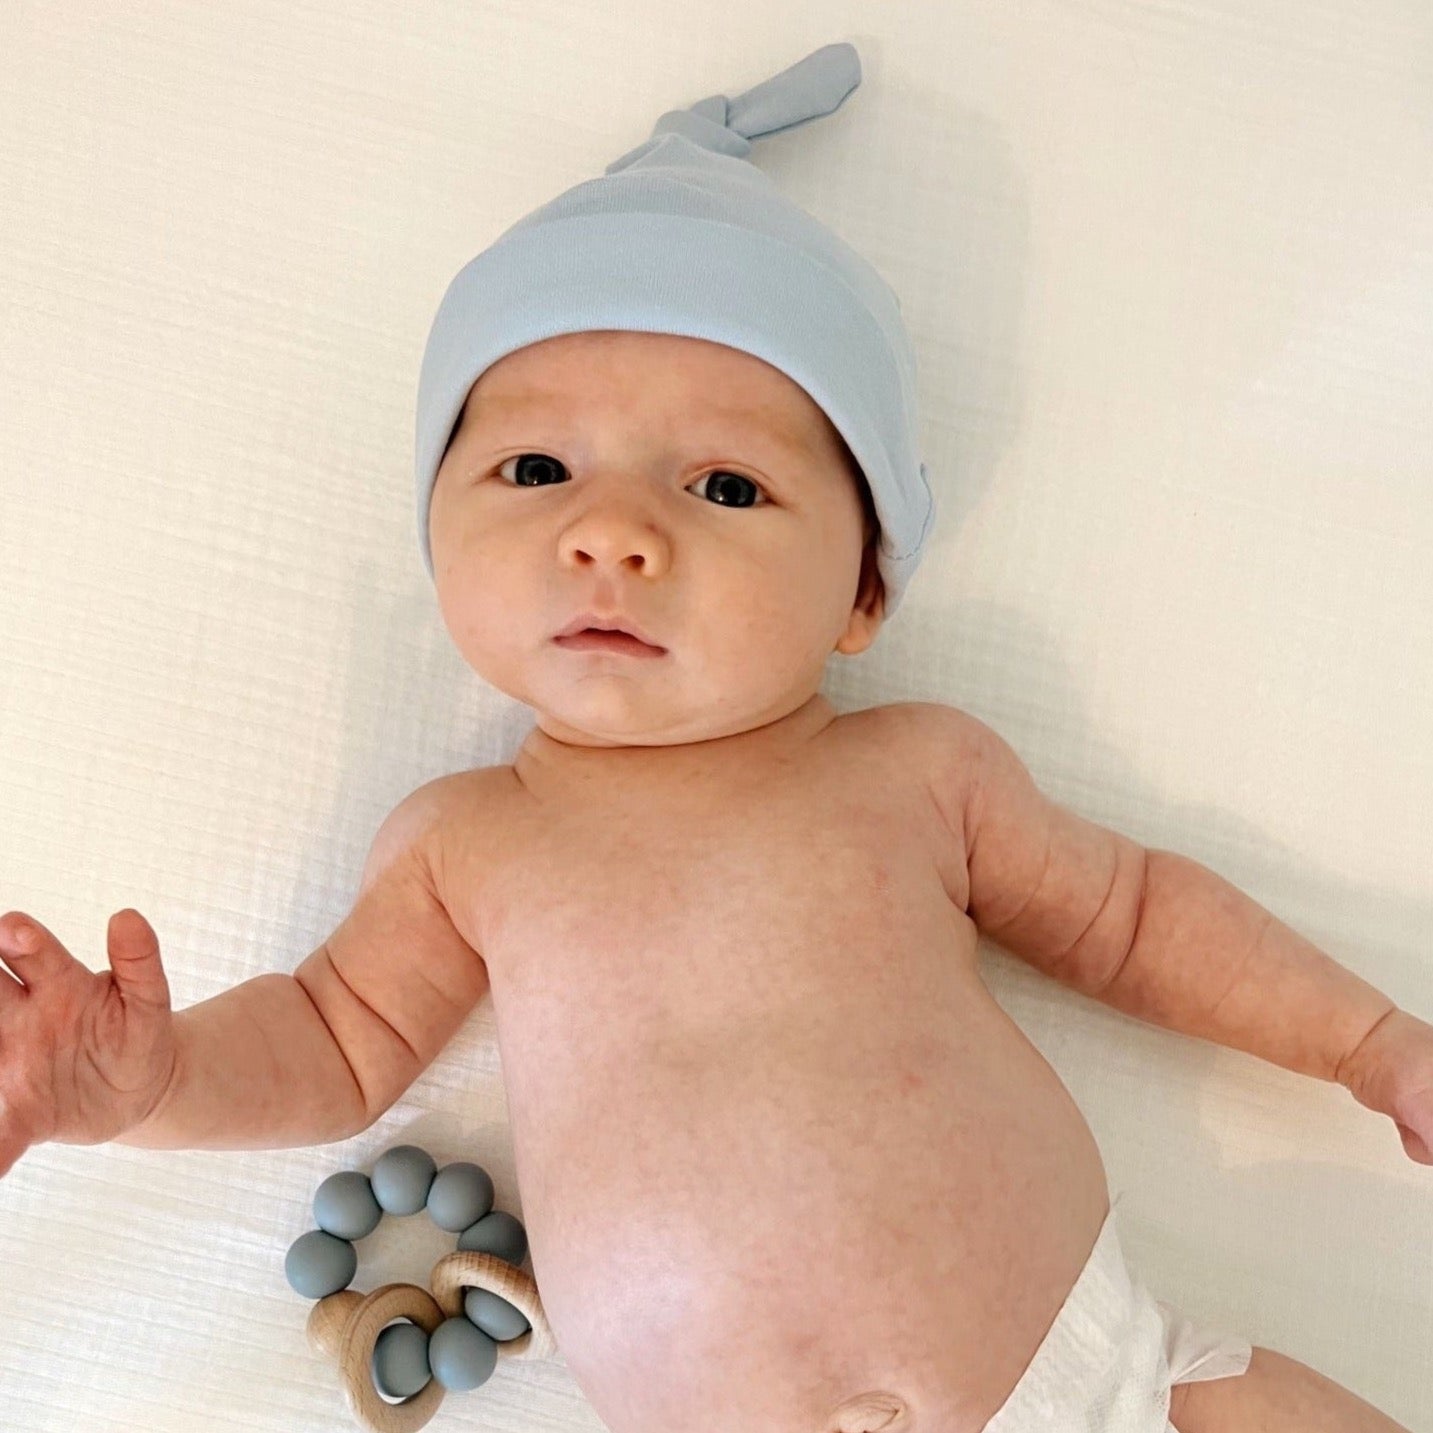 A baby wearing a blue topknot cotton hat while laying on a white muslin crib sheet.